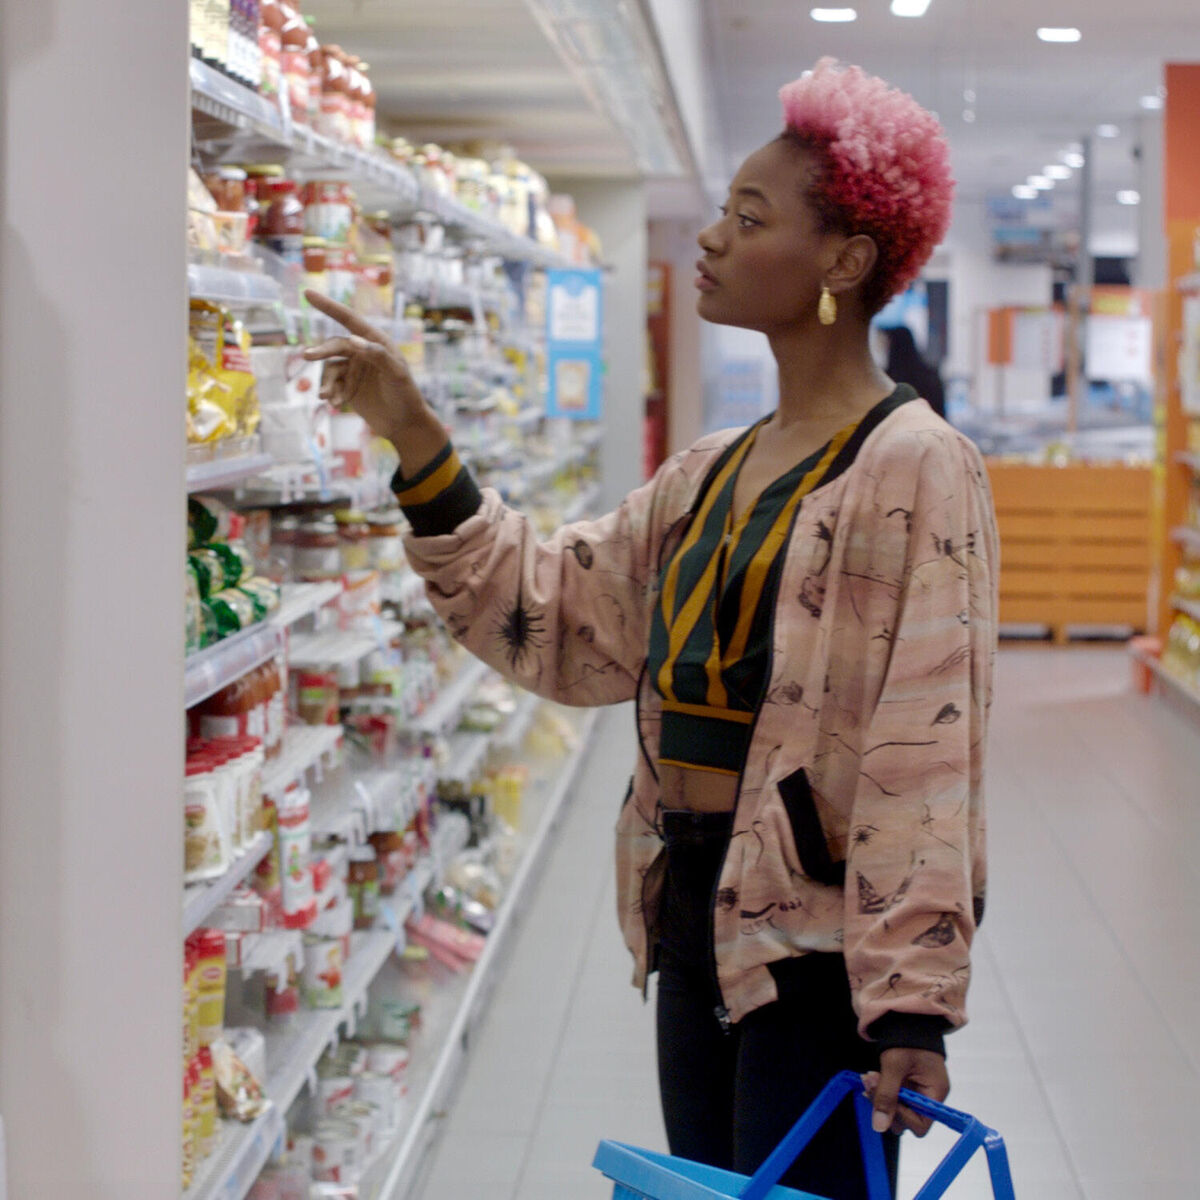 Want to learn more about the shopper journey?